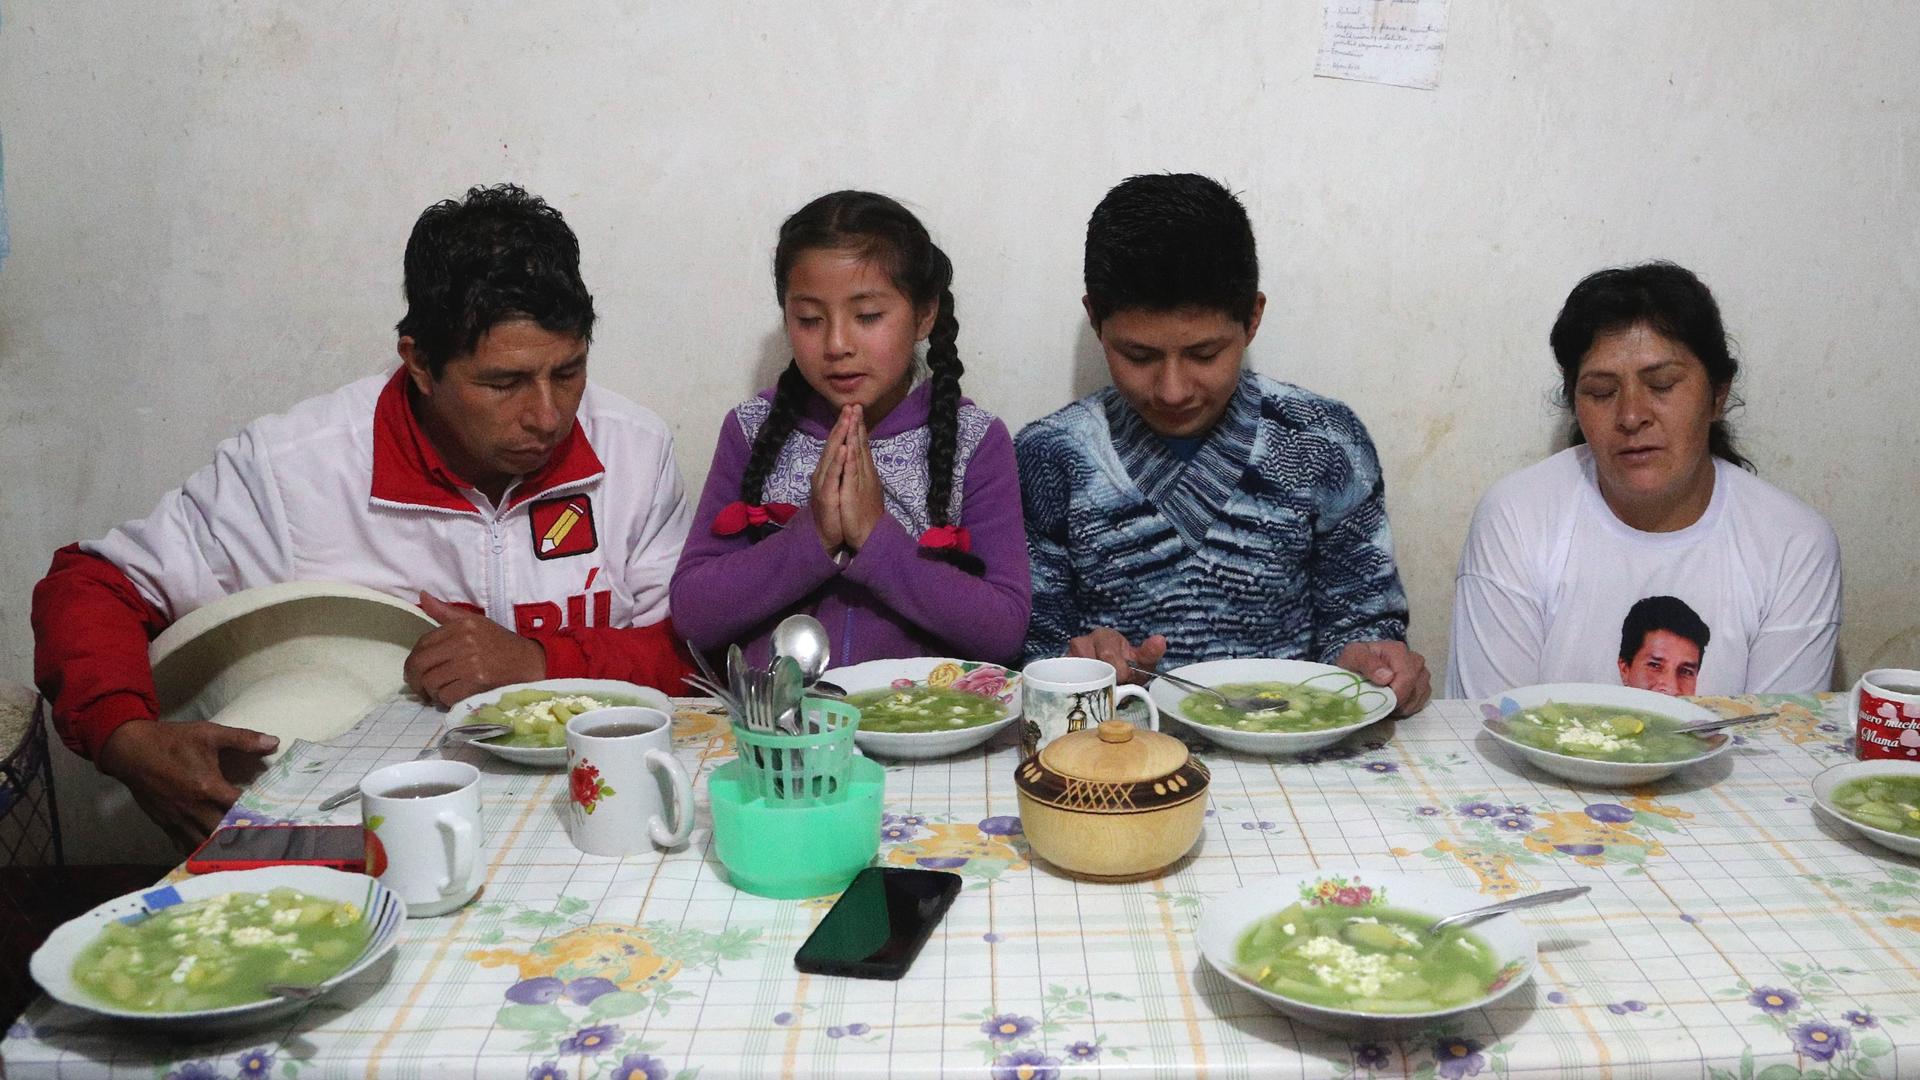 Free Peru party presidential candidate Pedro Castillo, from left, daughter Alondra, son Arnold and wife Lilia Paredes, pray before eating breakfast, in their home in Chugur, Peru, April 16, 2021. Castillo, a rural teacher, who has proposed rewriting Peru'